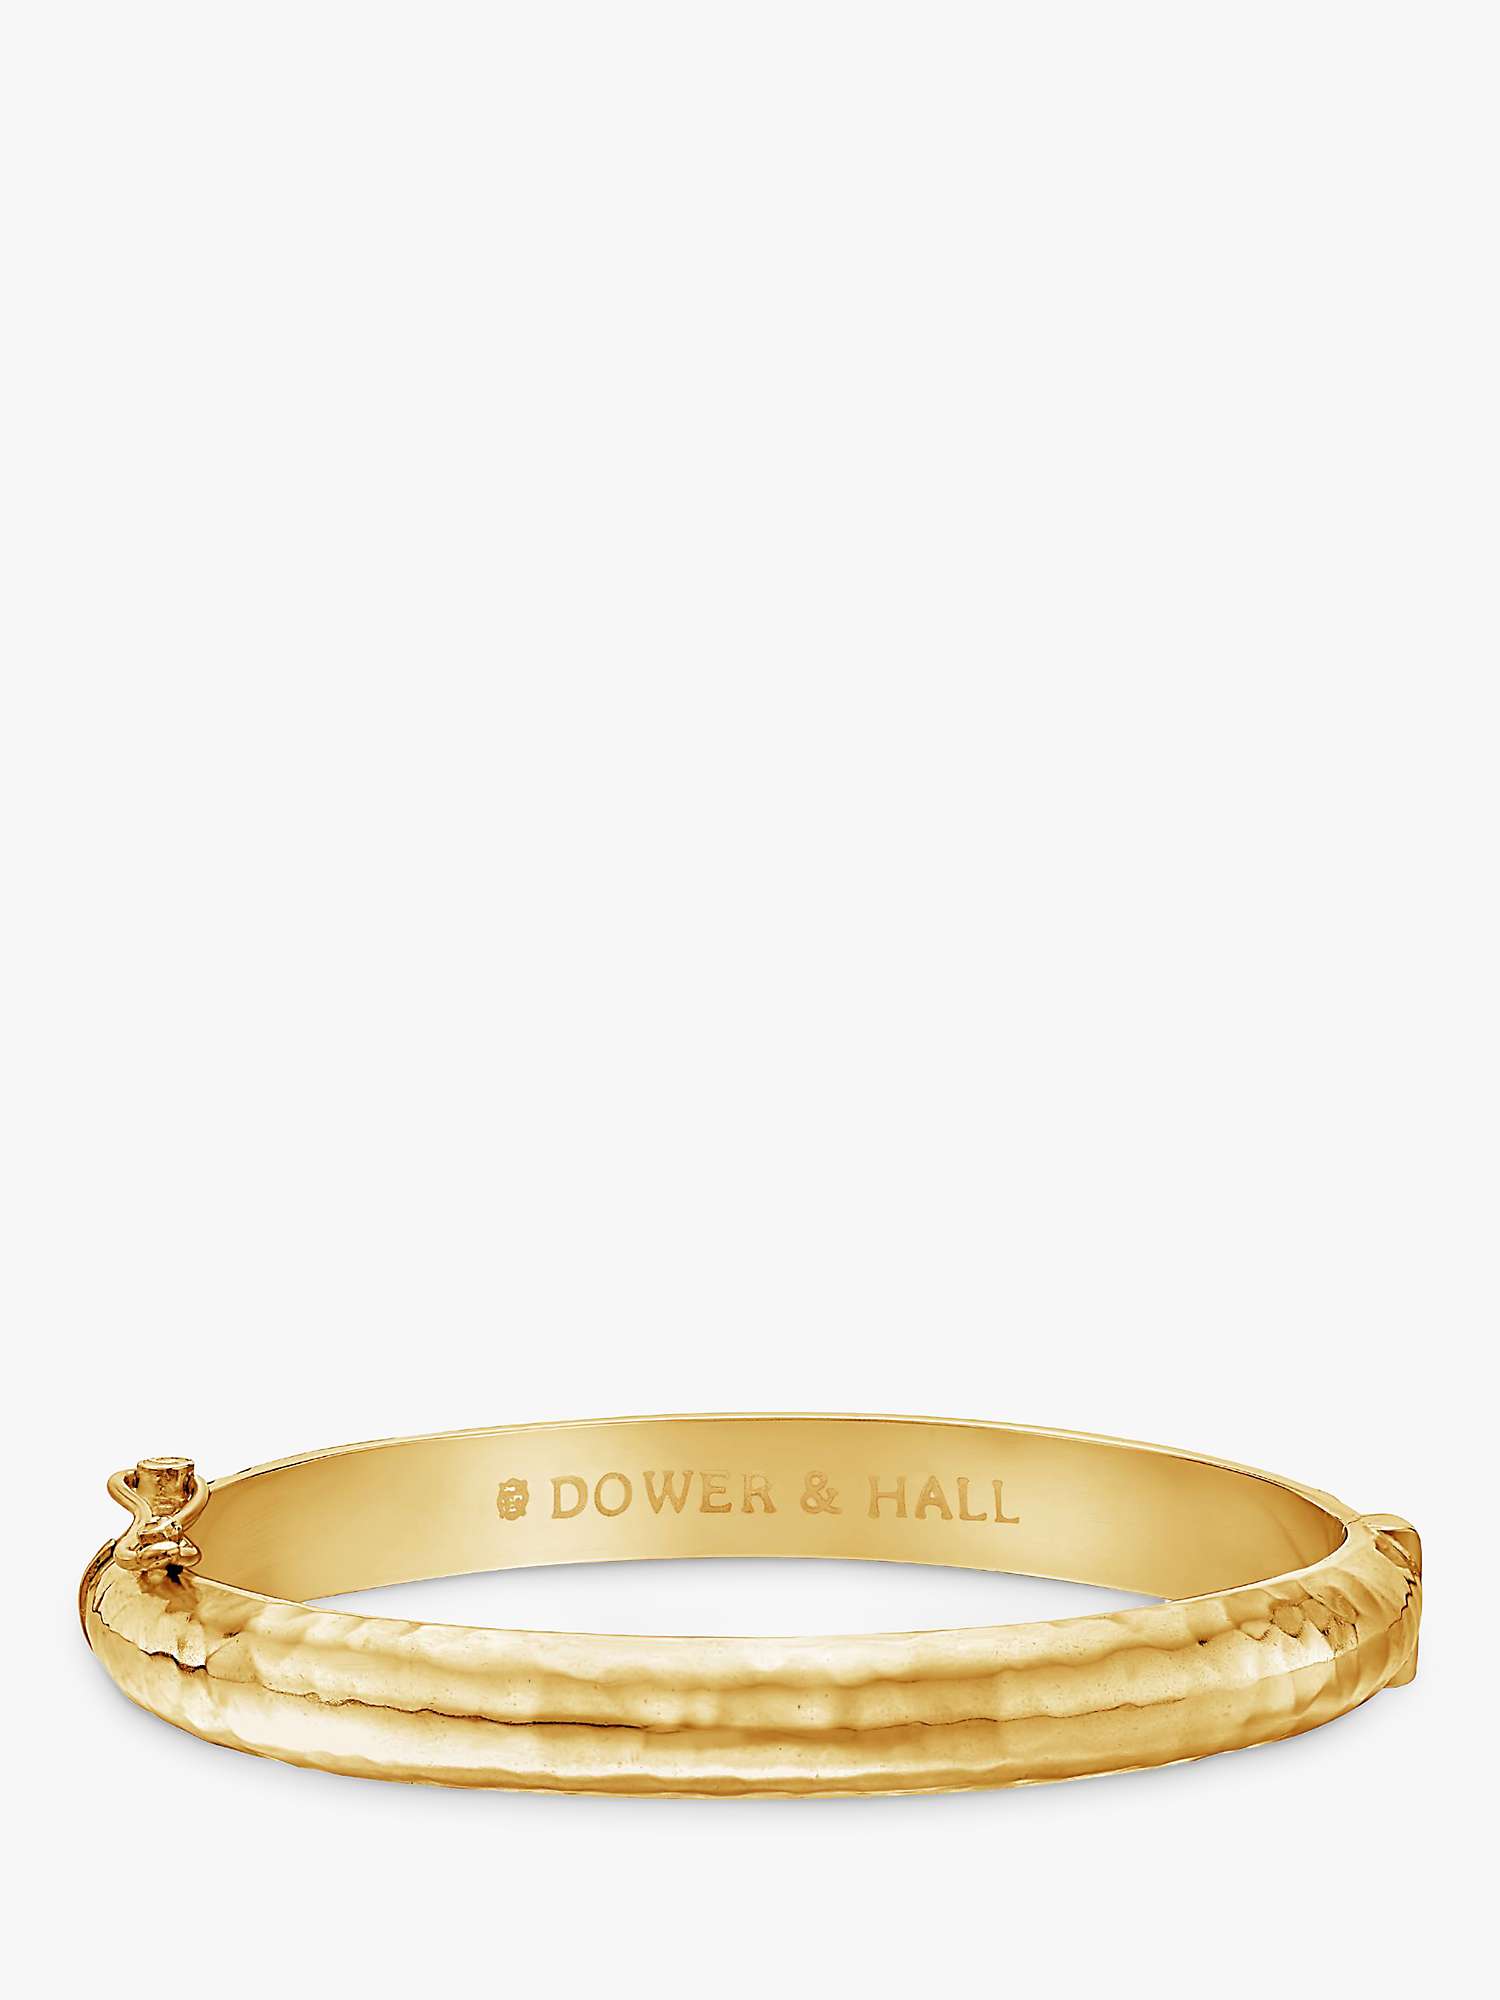 Buy Dower & Hall 18ct Gold Plated Hollow Hinged Hammered Bangle, Gold Online at johnlewis.com